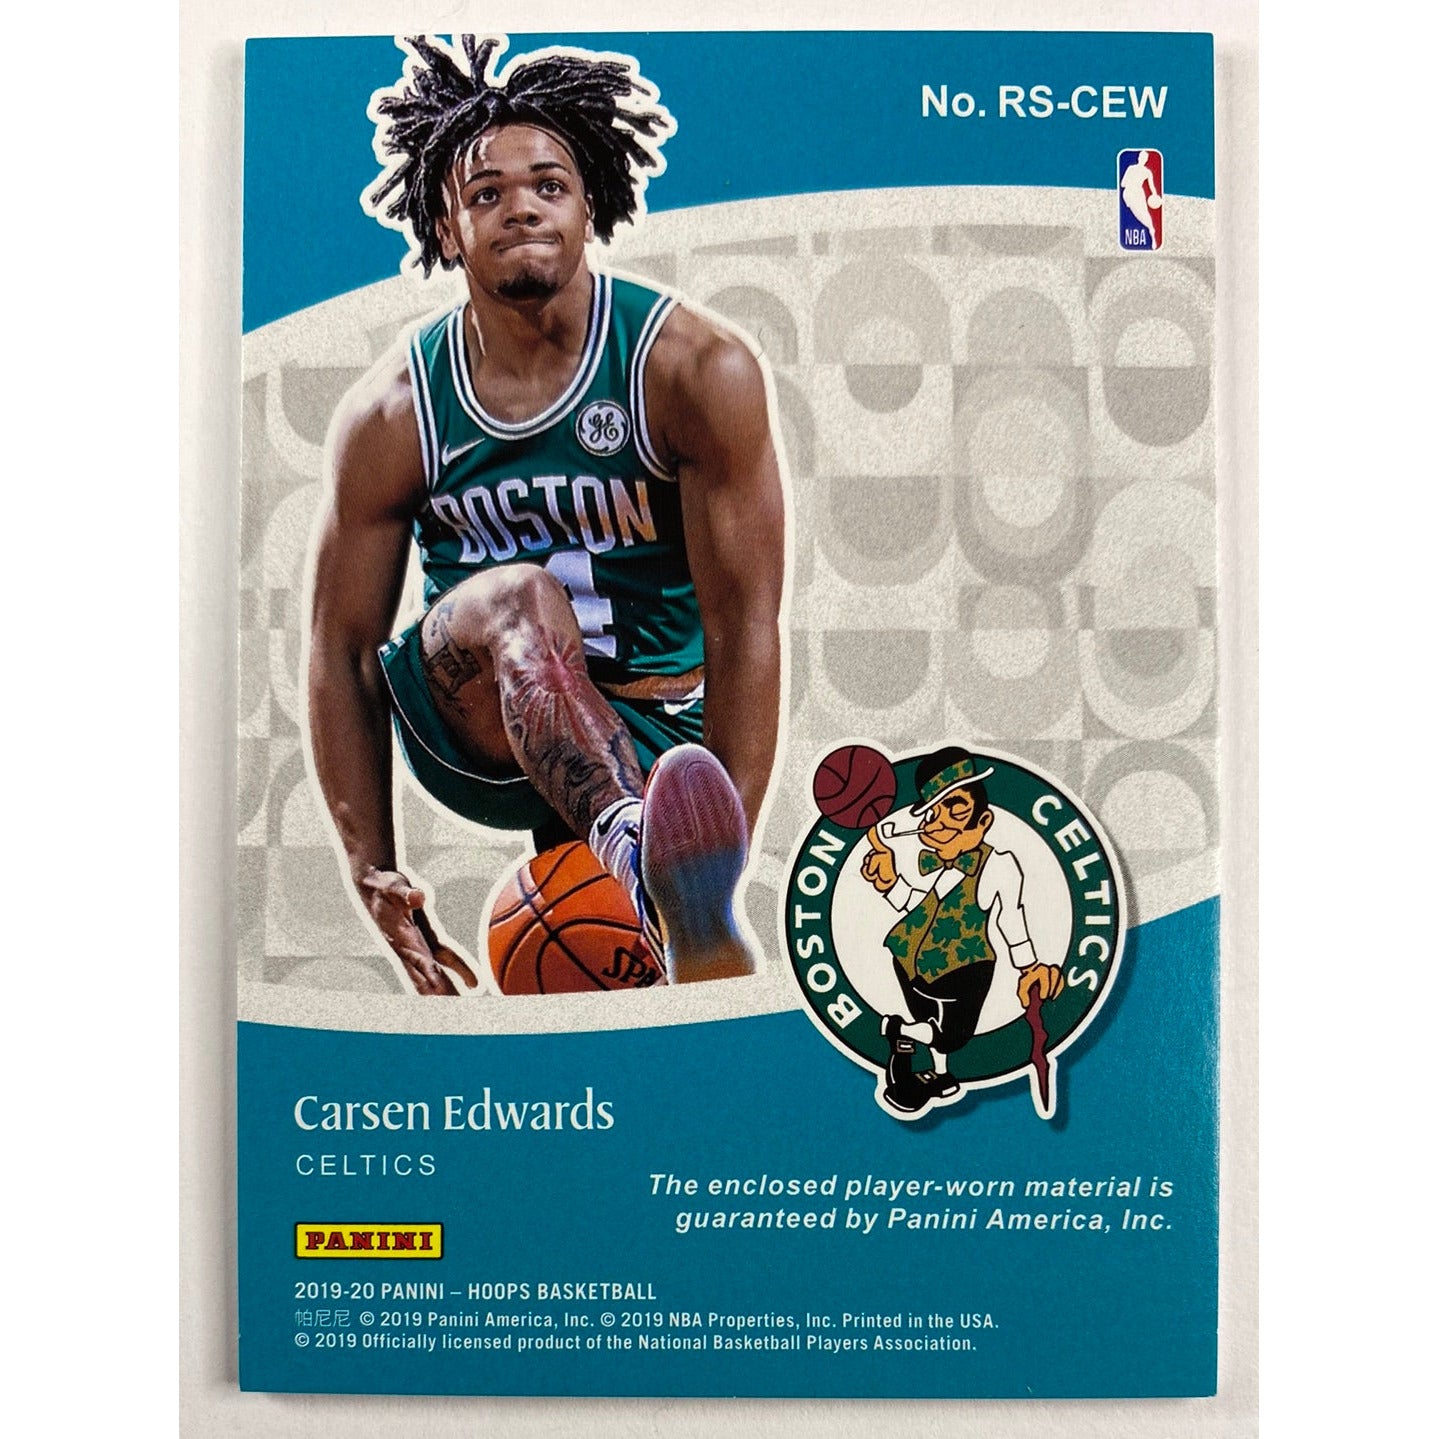 2019-20 Hoops Carsen Edwards Rise N Shine Rookie Patch